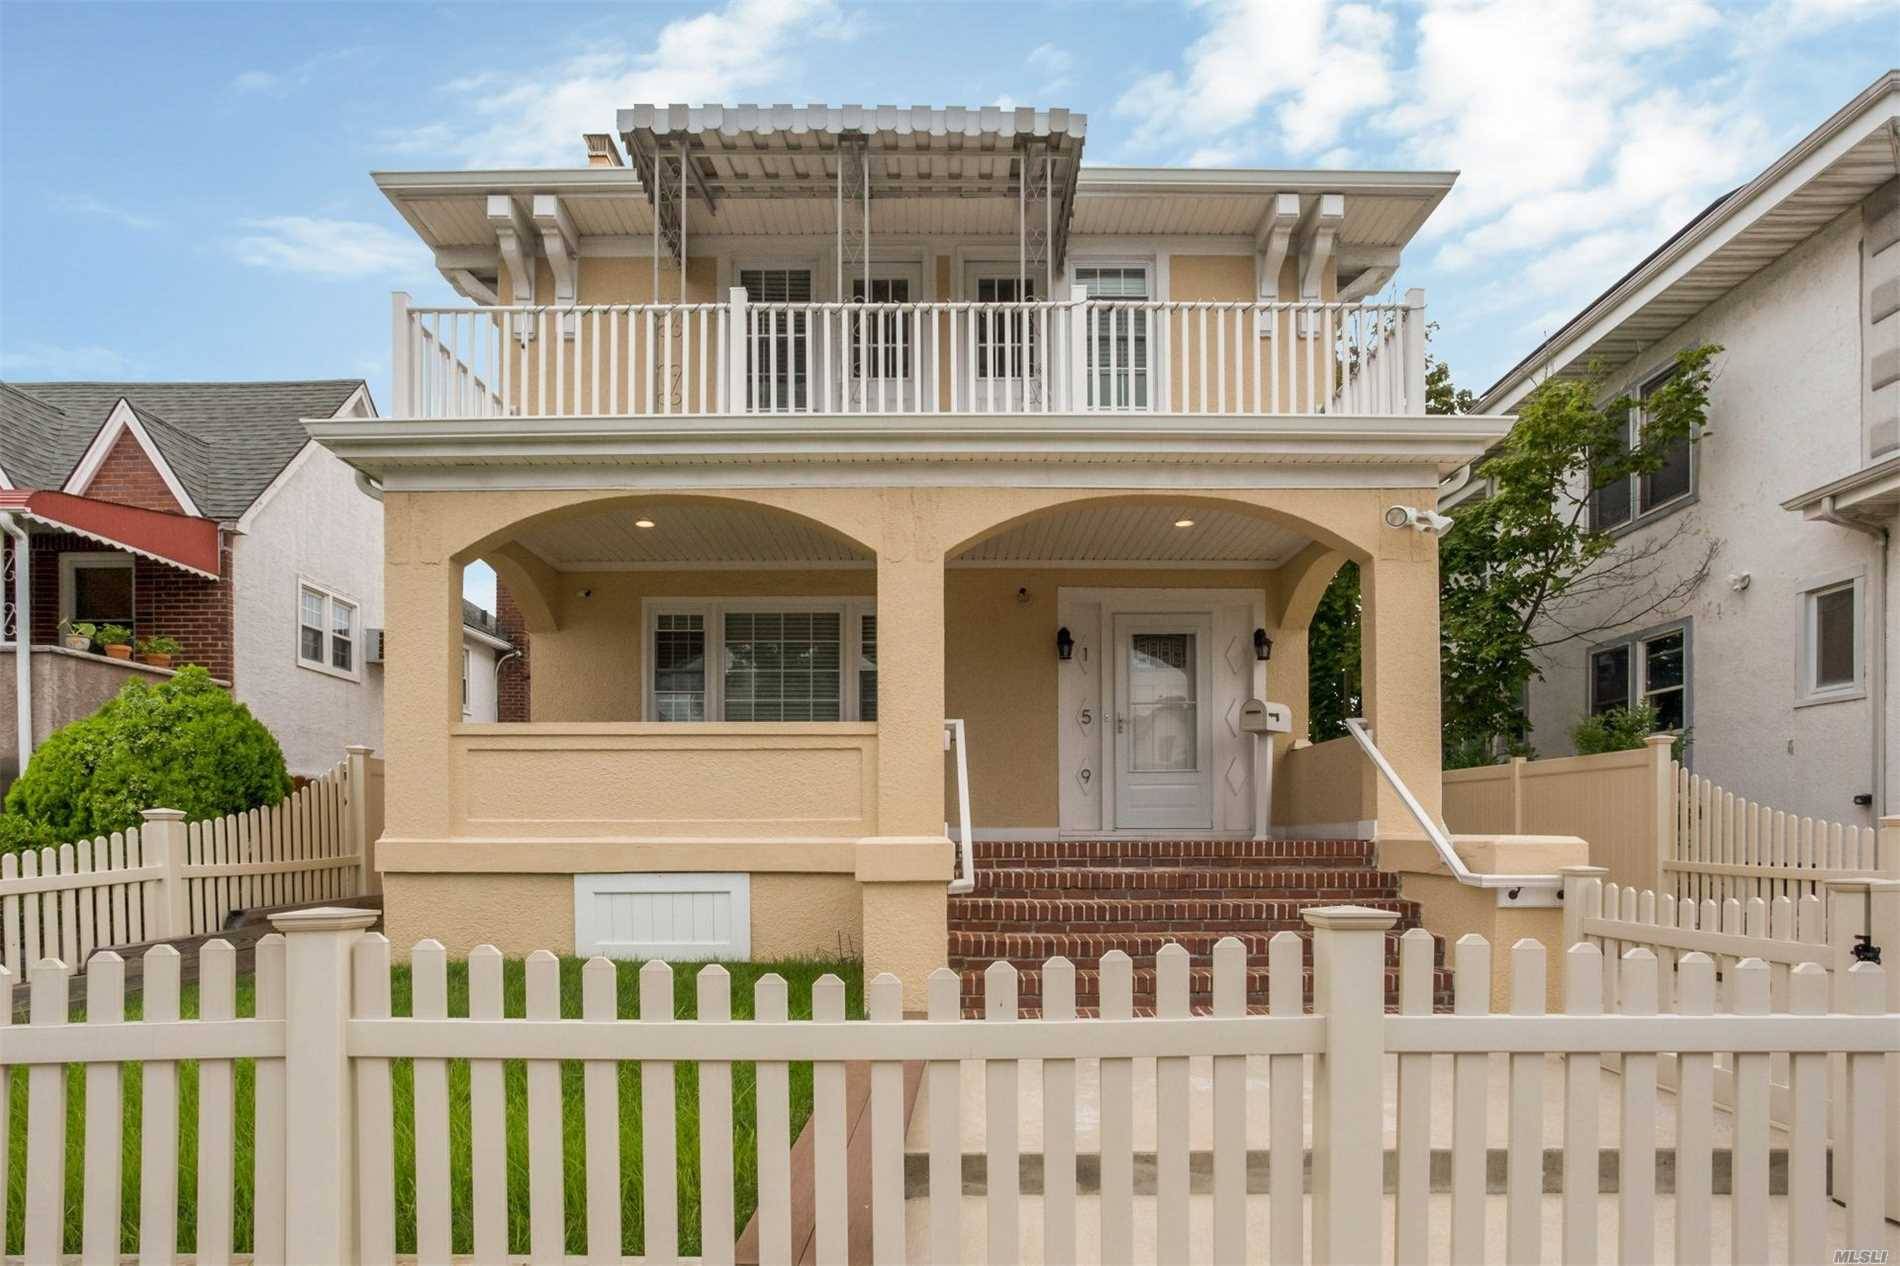 Updated 2 Family Home In The Heart Of Long Beach.